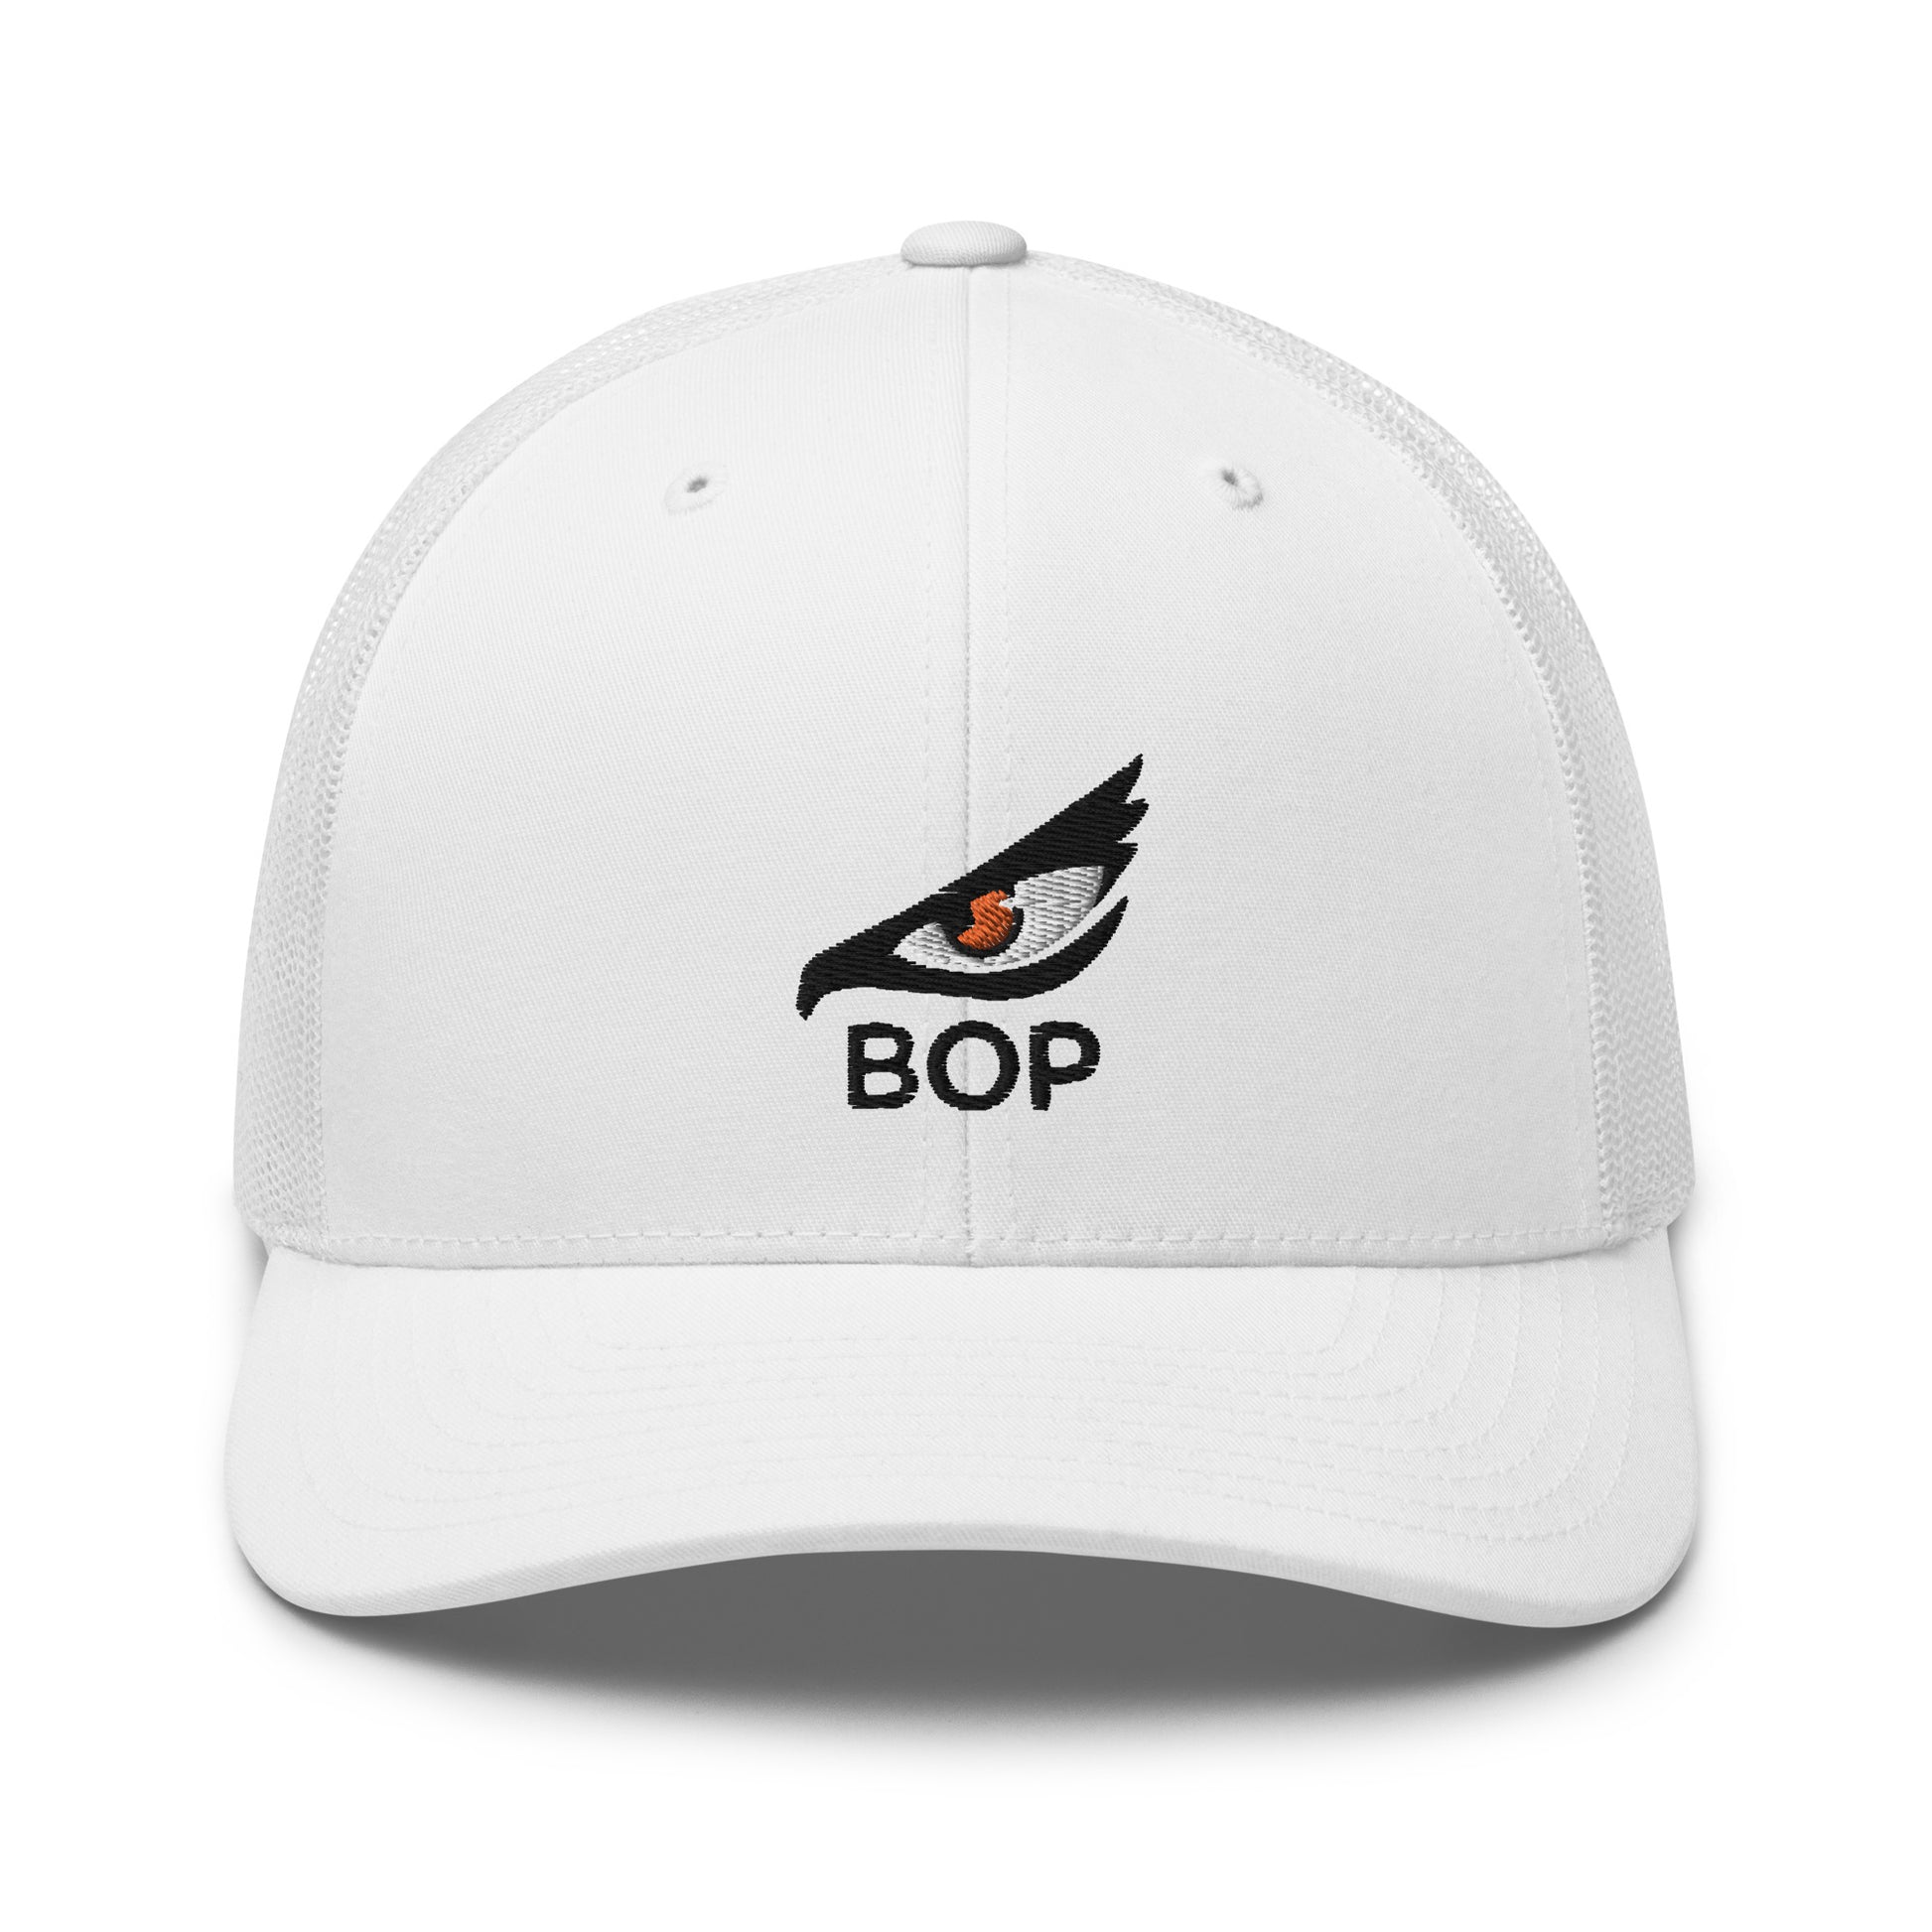 White Trucker Hat for Men with Mesh Back and Eagle Eye